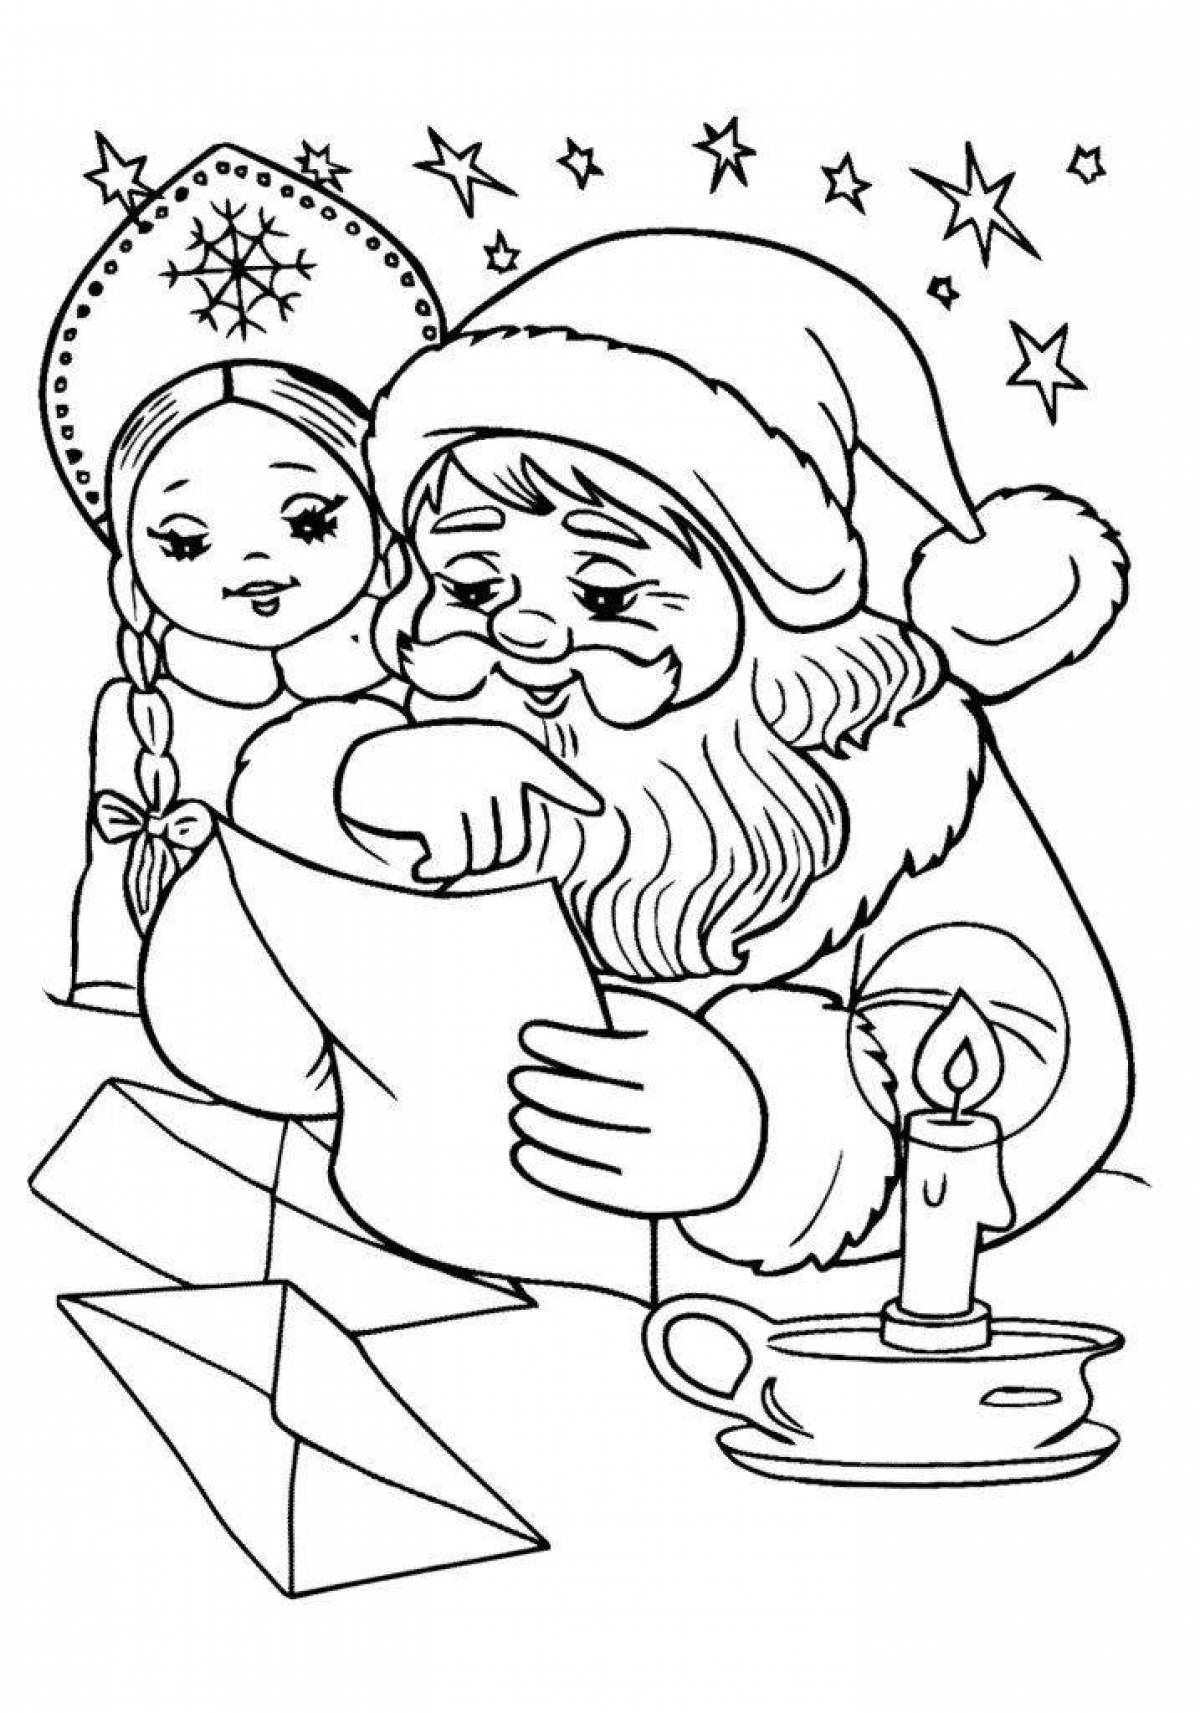 Sweet Morozko coloring book for kids